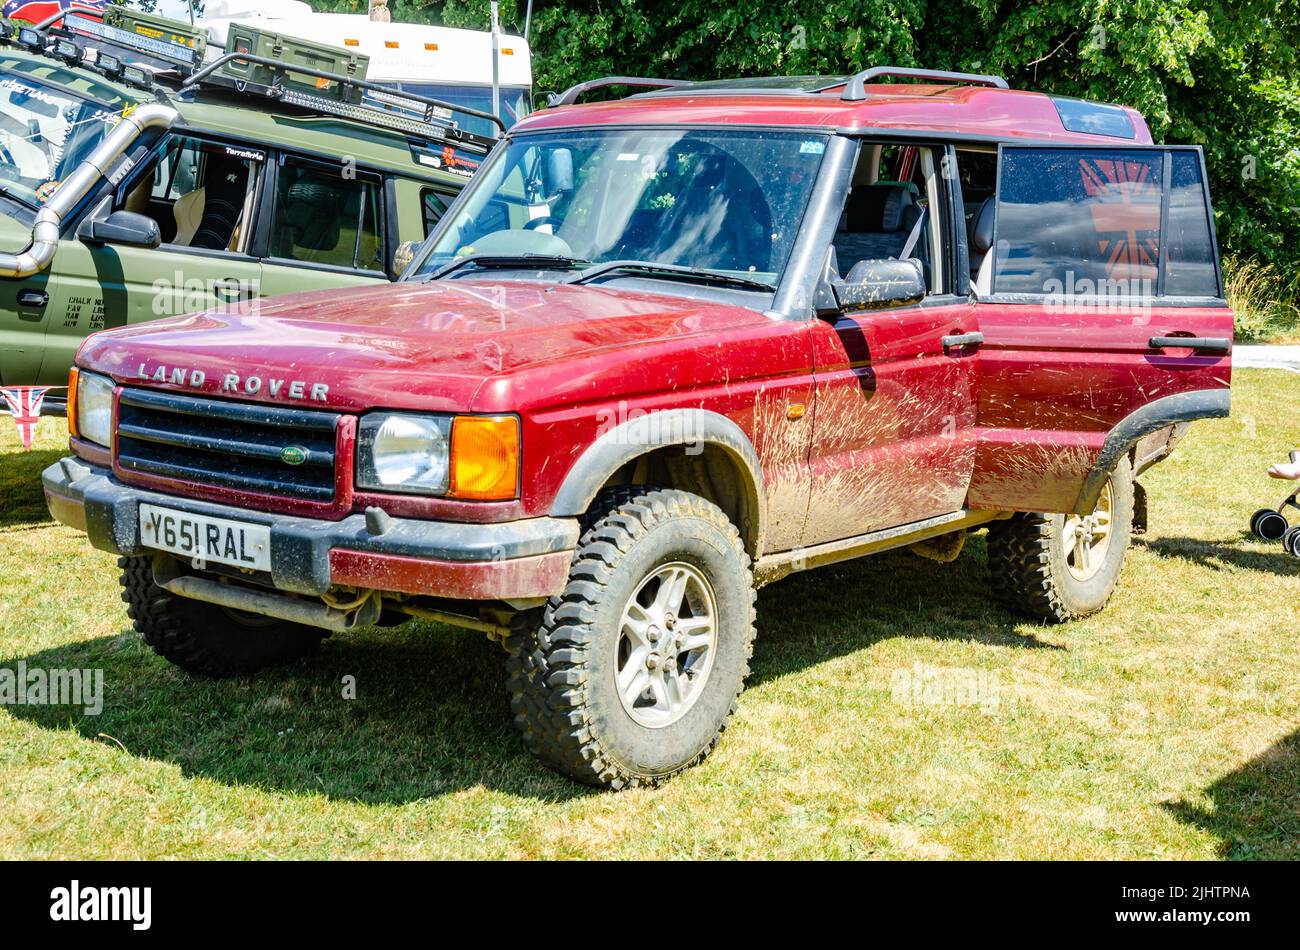 Front view of a 2001 Land Rover Discovery All-terrain vehicle in red with dirt and mud up the side seen here at The Berkshire Motor Show in Reading, Stock Photo